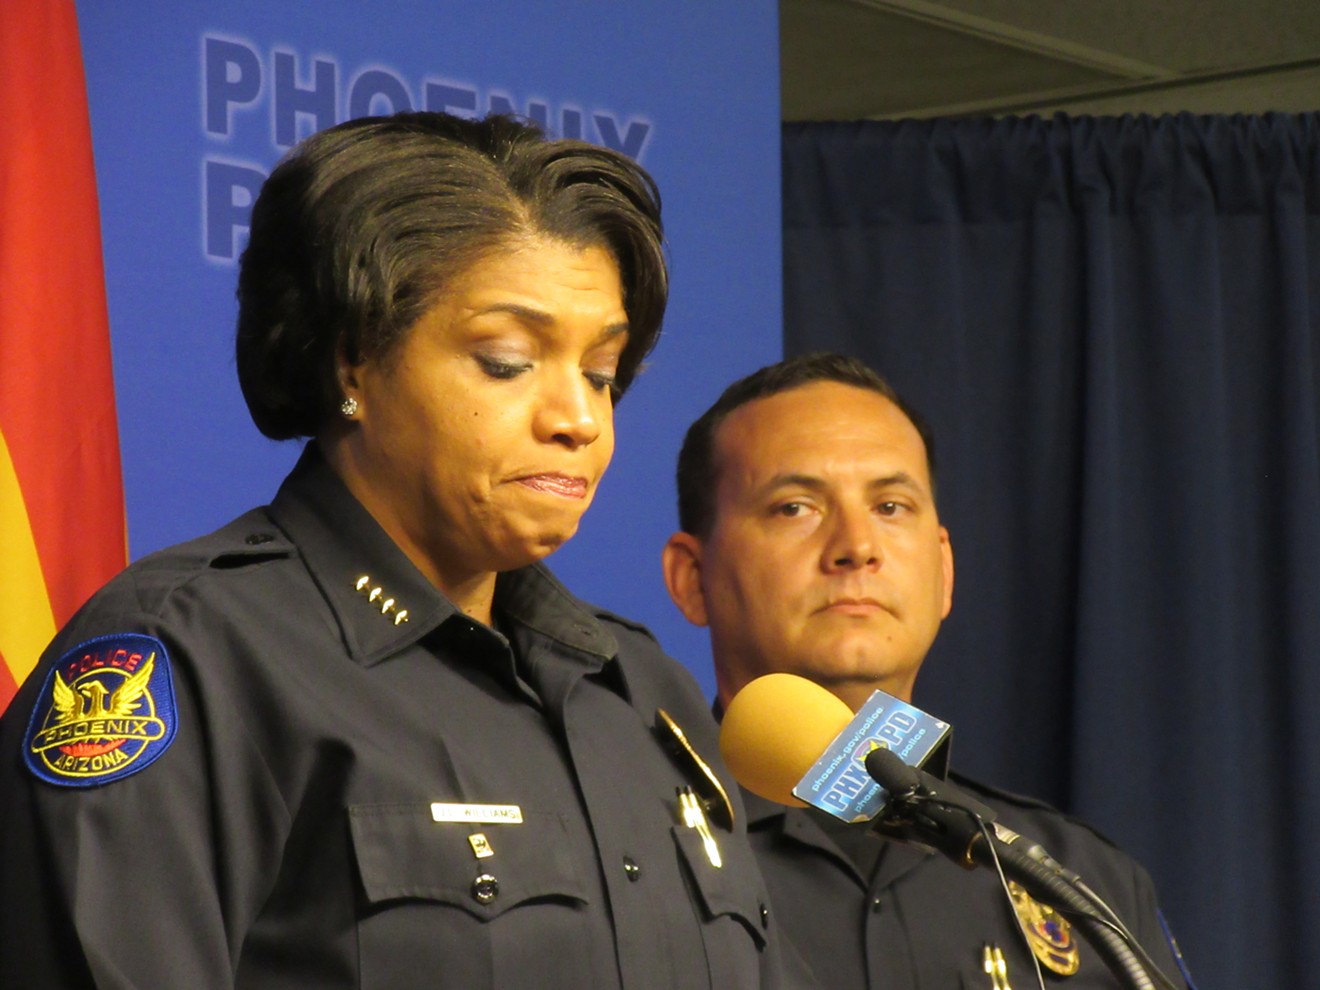 Phoenix Police Chief Jeri Williams and Sergeant Vince Lewis held a news conference on Wednesday to discuss why they want a couple charged with murder following the gunshot death of their 9-year-old boy.